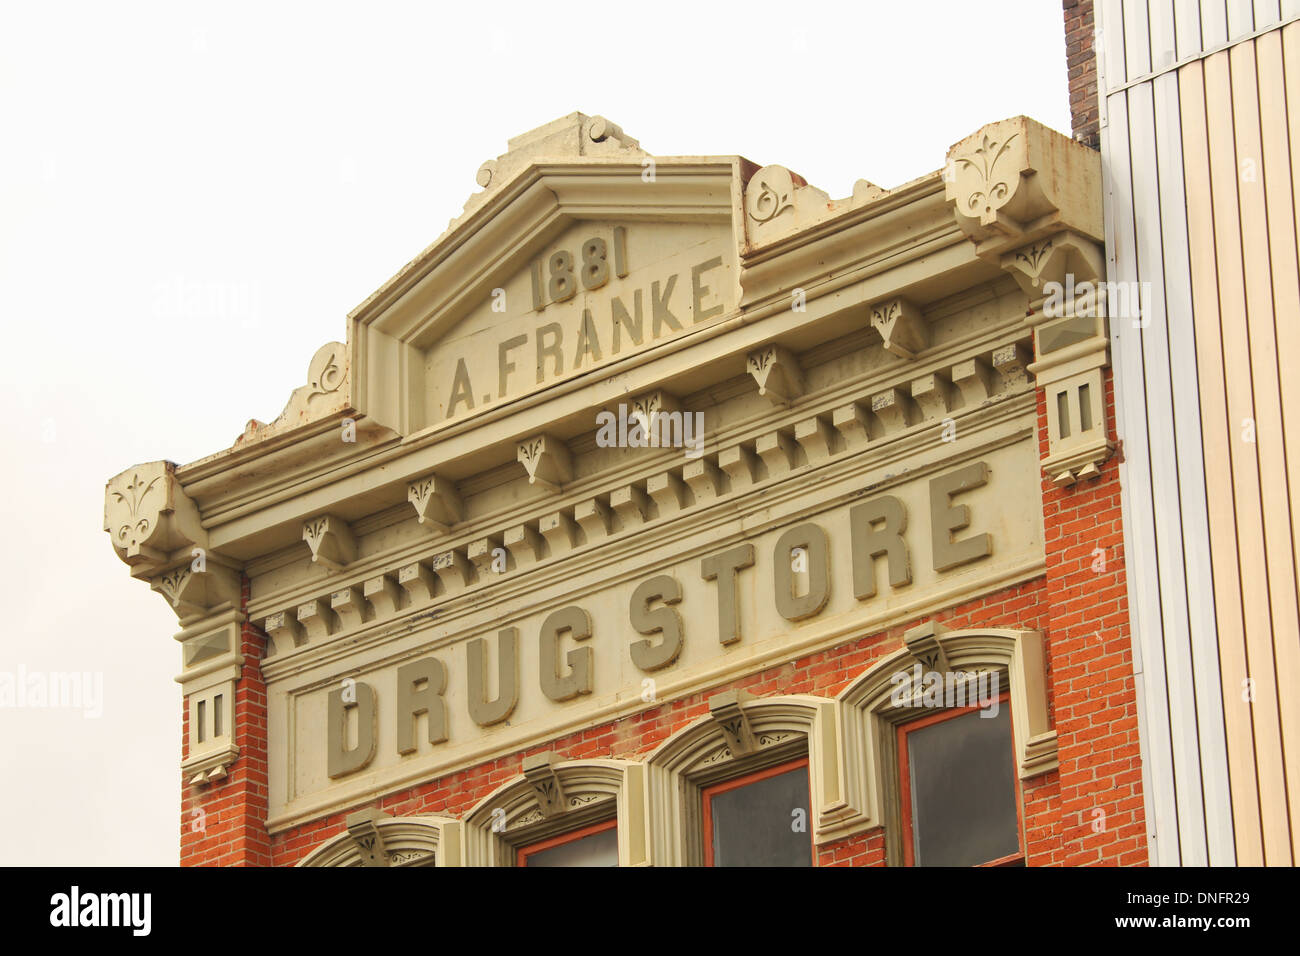 A. Franke building. Circa 1881. Drugstore. Architecture. Wapakoneta, Ohio, USA. A lot of dirt and bad paint visible. Stock Photo